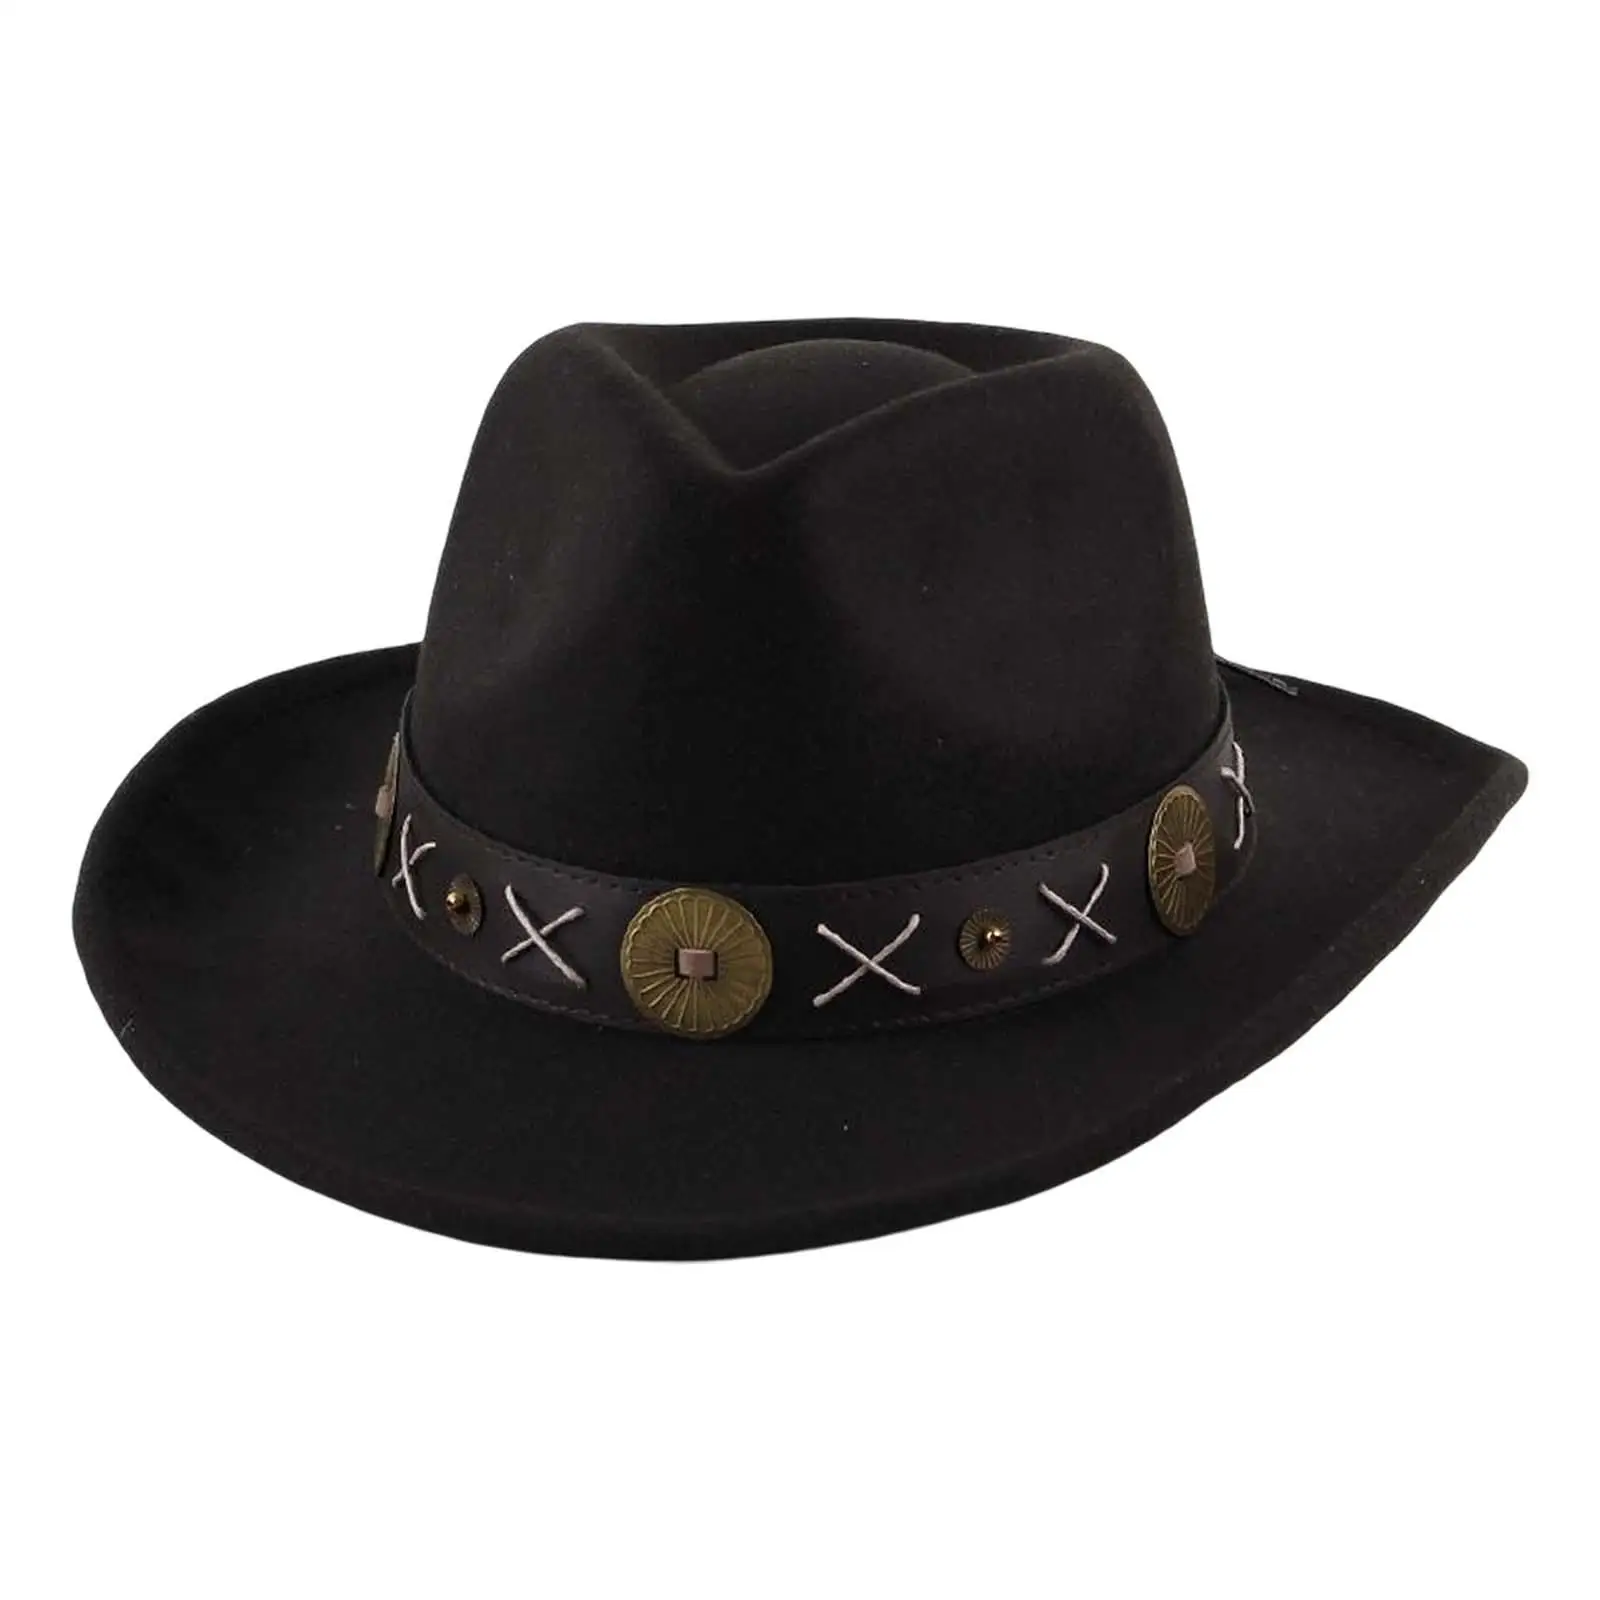 Cowboy Hat Novelty Comfortable Decor Sunhat Breathable Wide Brim Casual Cowgirl Hat for Women Men Travel Carnival Party